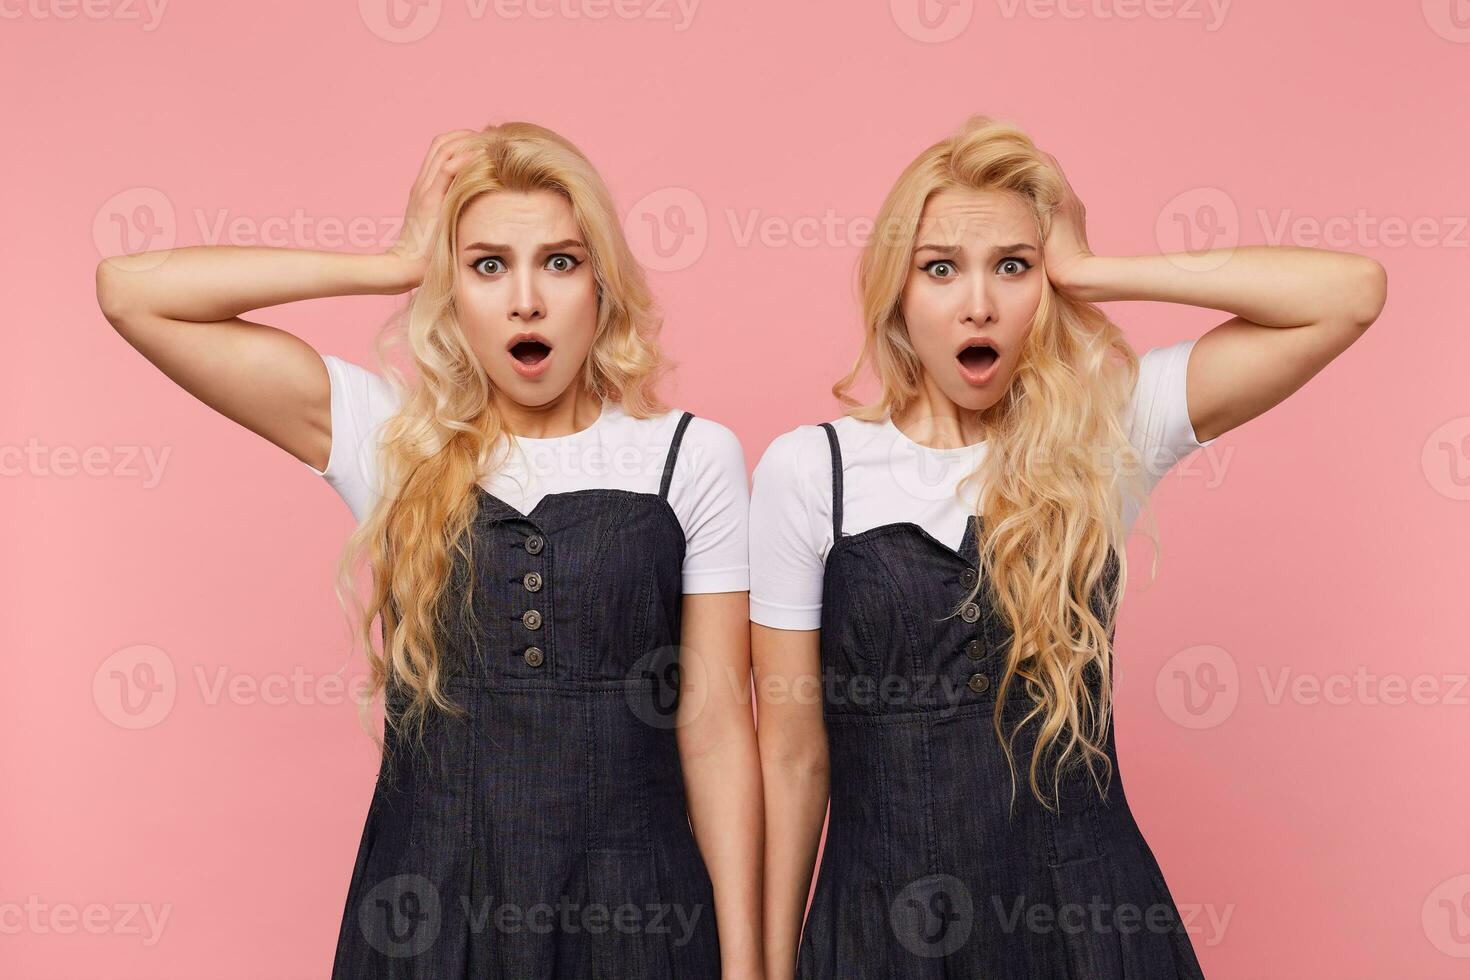 Shocked young lovely long haired blonde women keeping raised palms on their heads while looking dazedly at camera with wide mouths opened, isolated over pink background photo